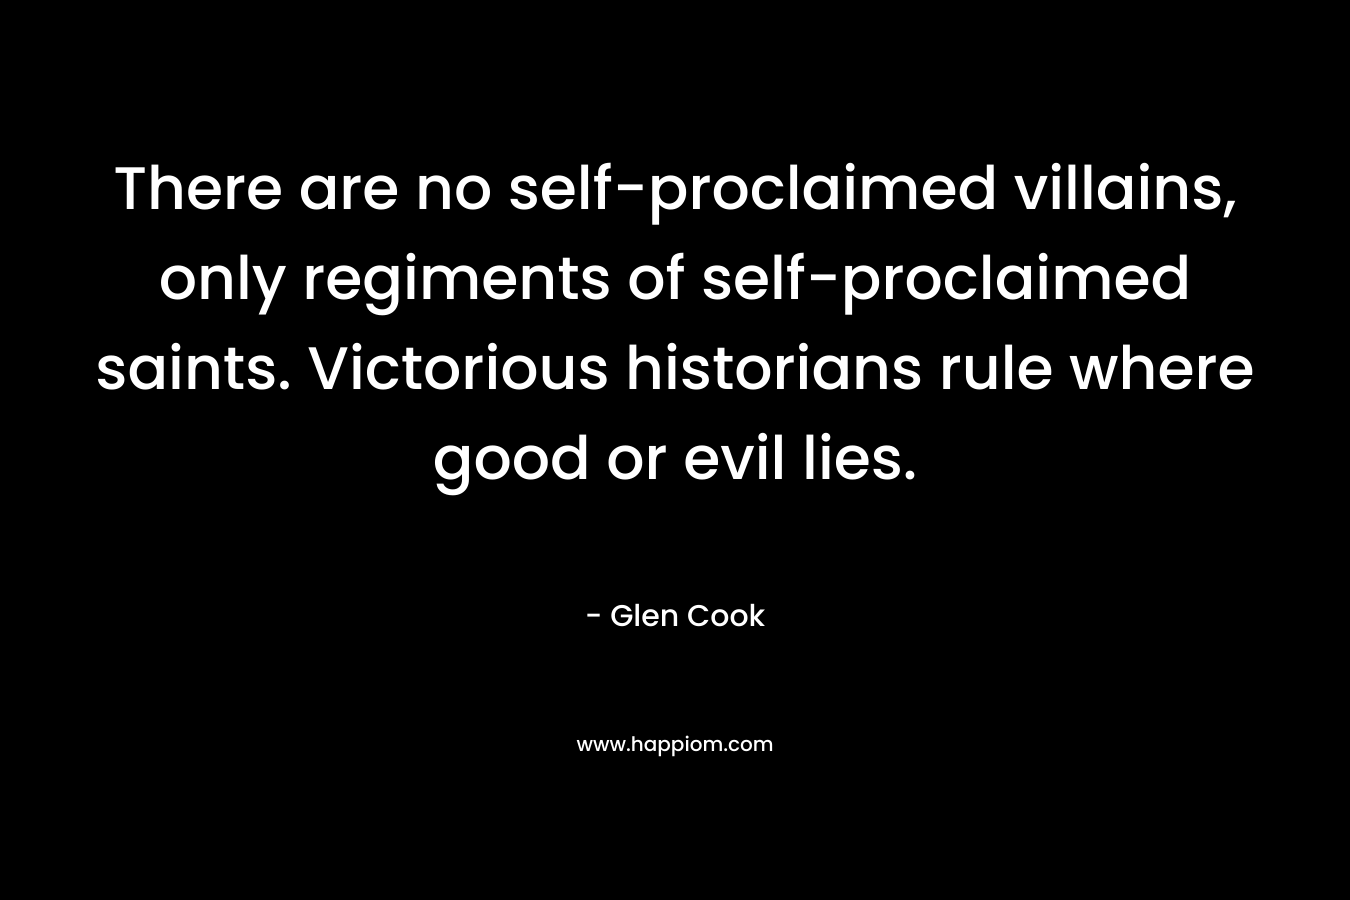 There are no self-proclaimed villains, only regiments of self-proclaimed saints. Victorious historians rule where good or evil lies. – Glen Cook